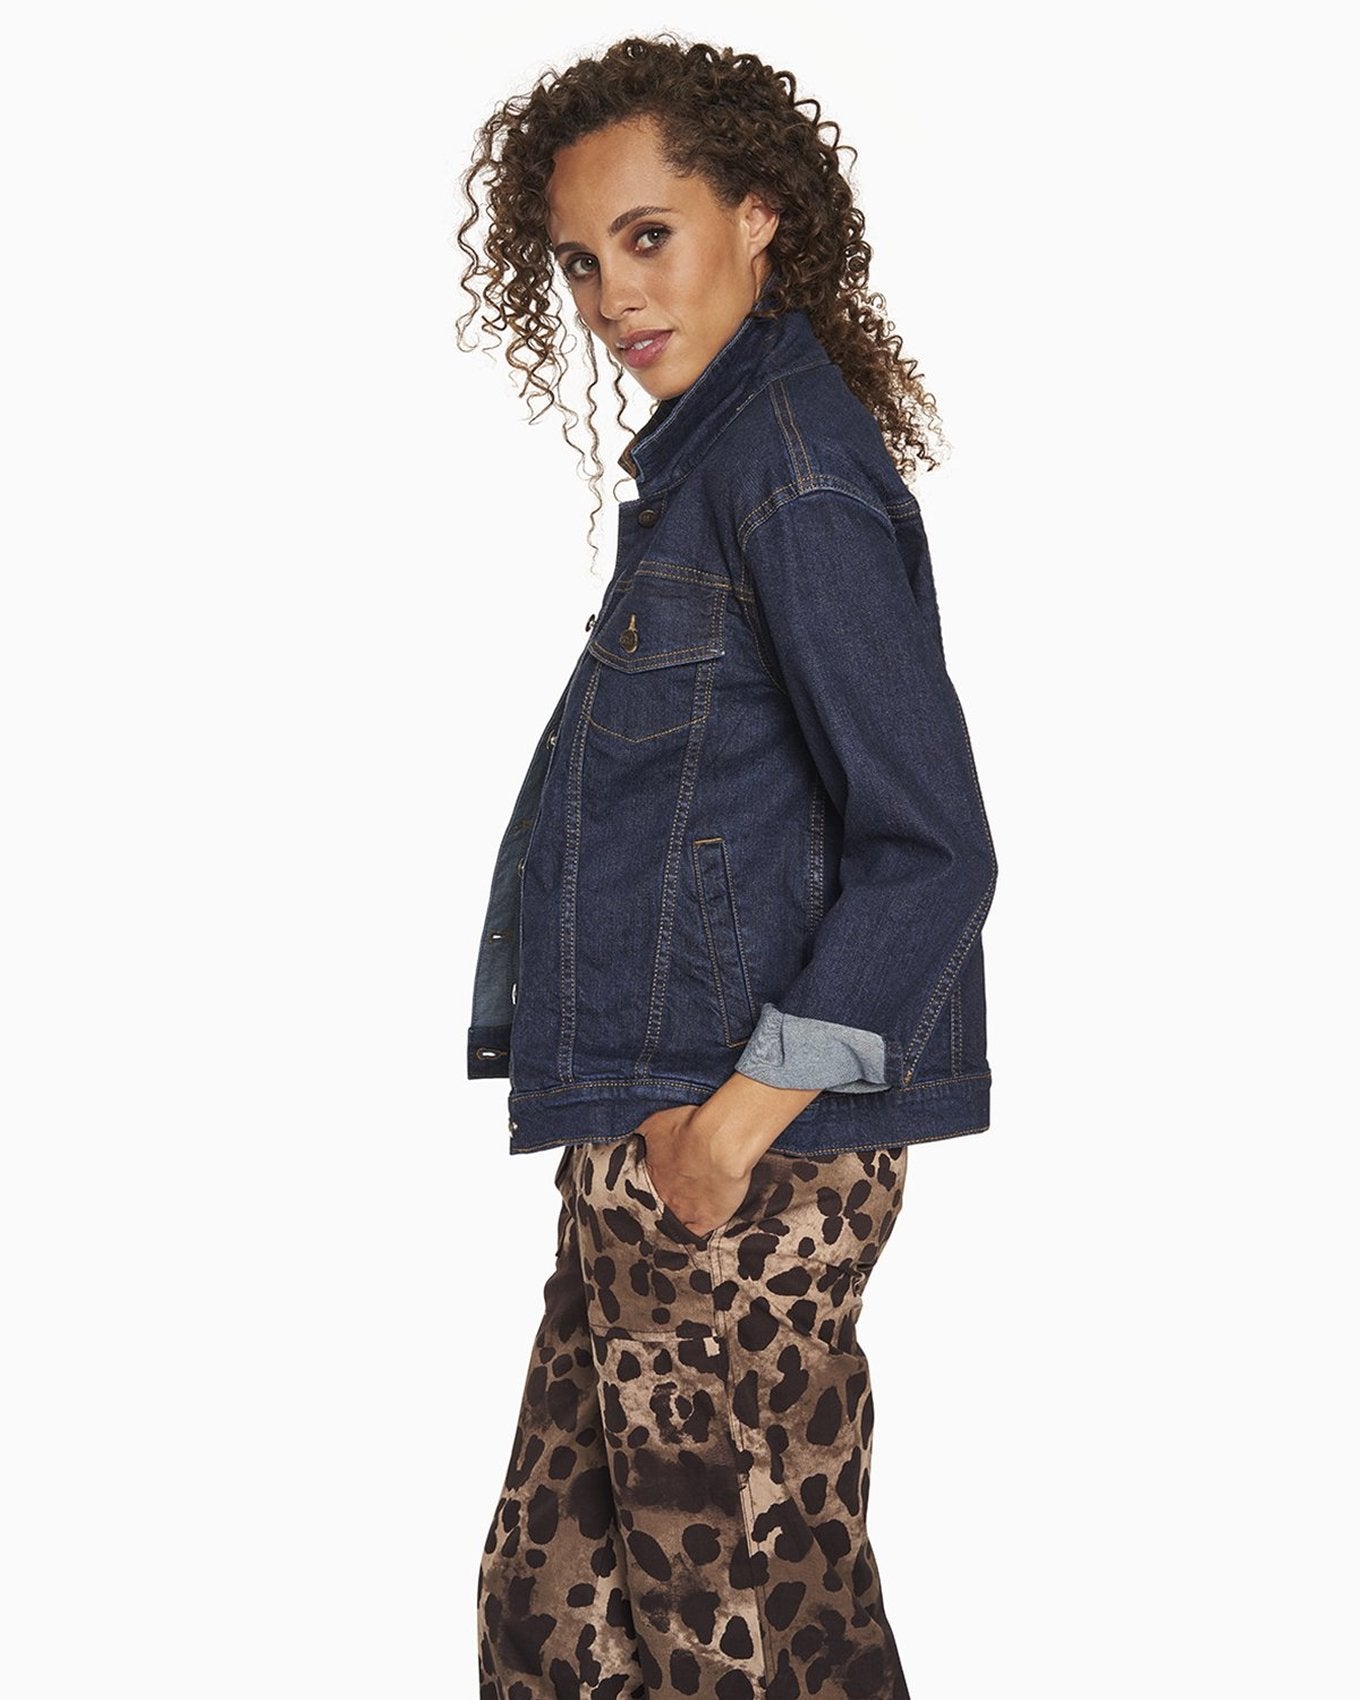 YesAnd Organic Print Utility Pant Pant in color Classic Leopard C01 and shape pants